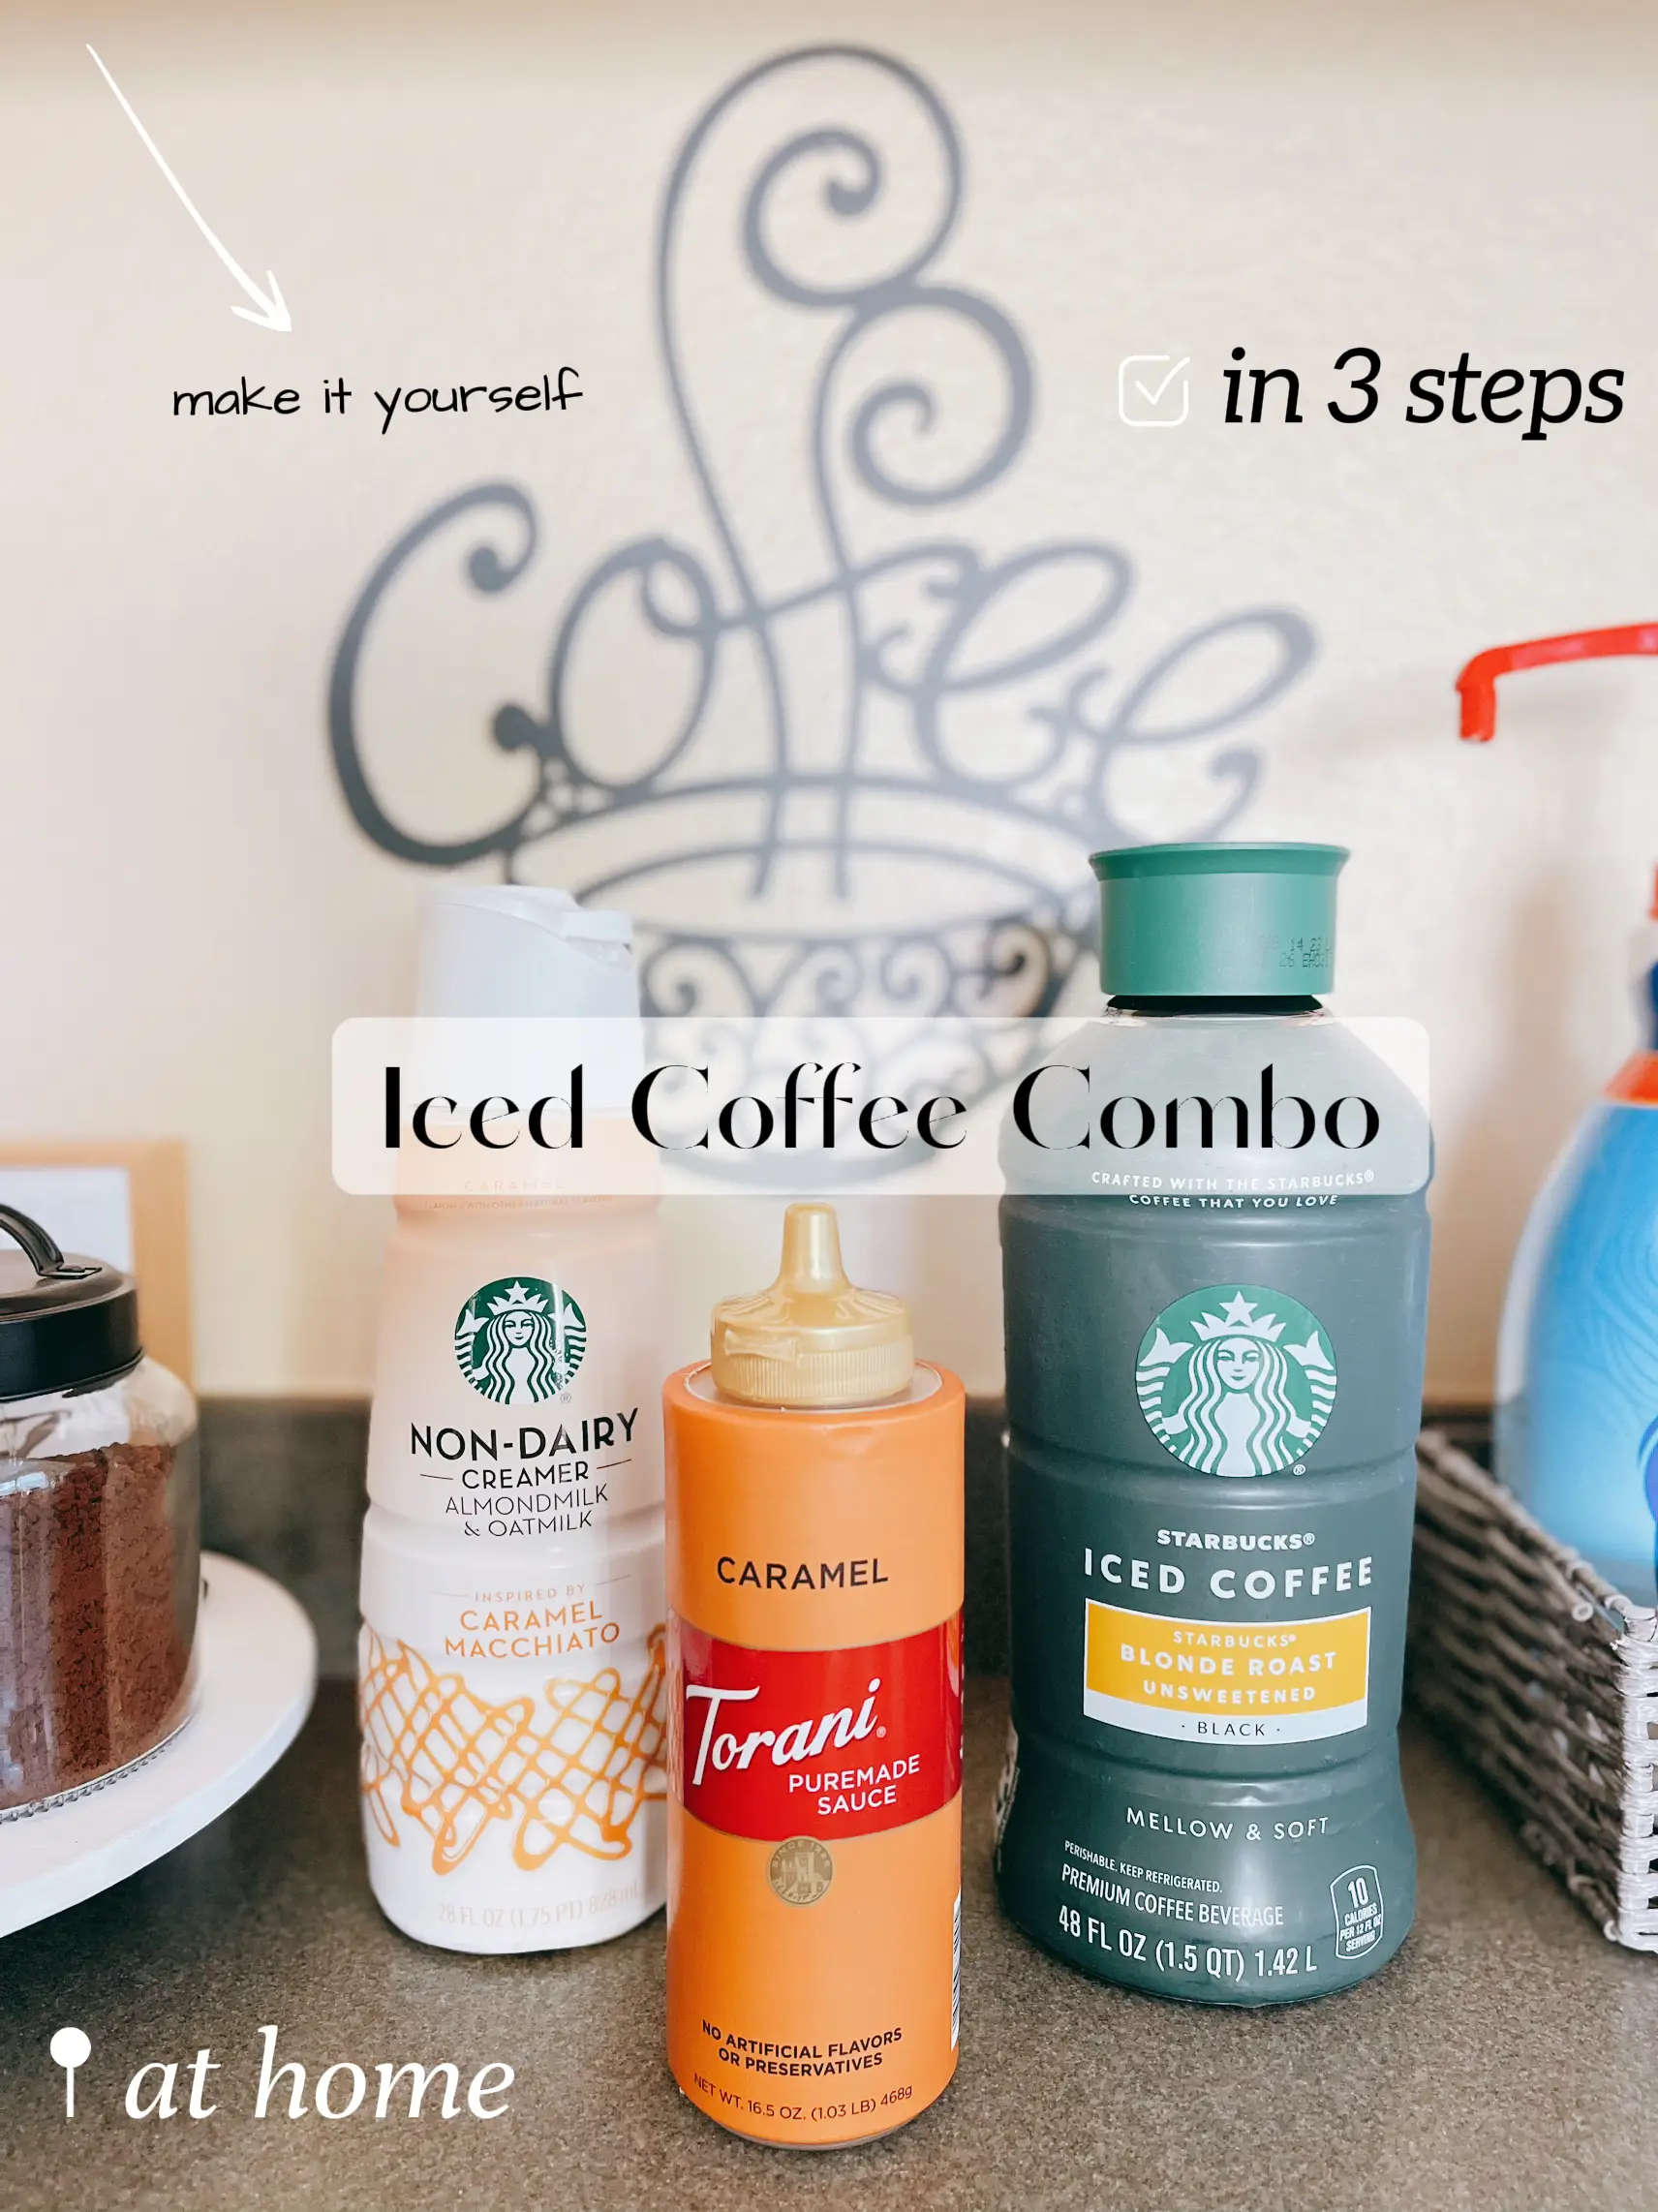 Crafted for Home  Starbucks Iced Coffee